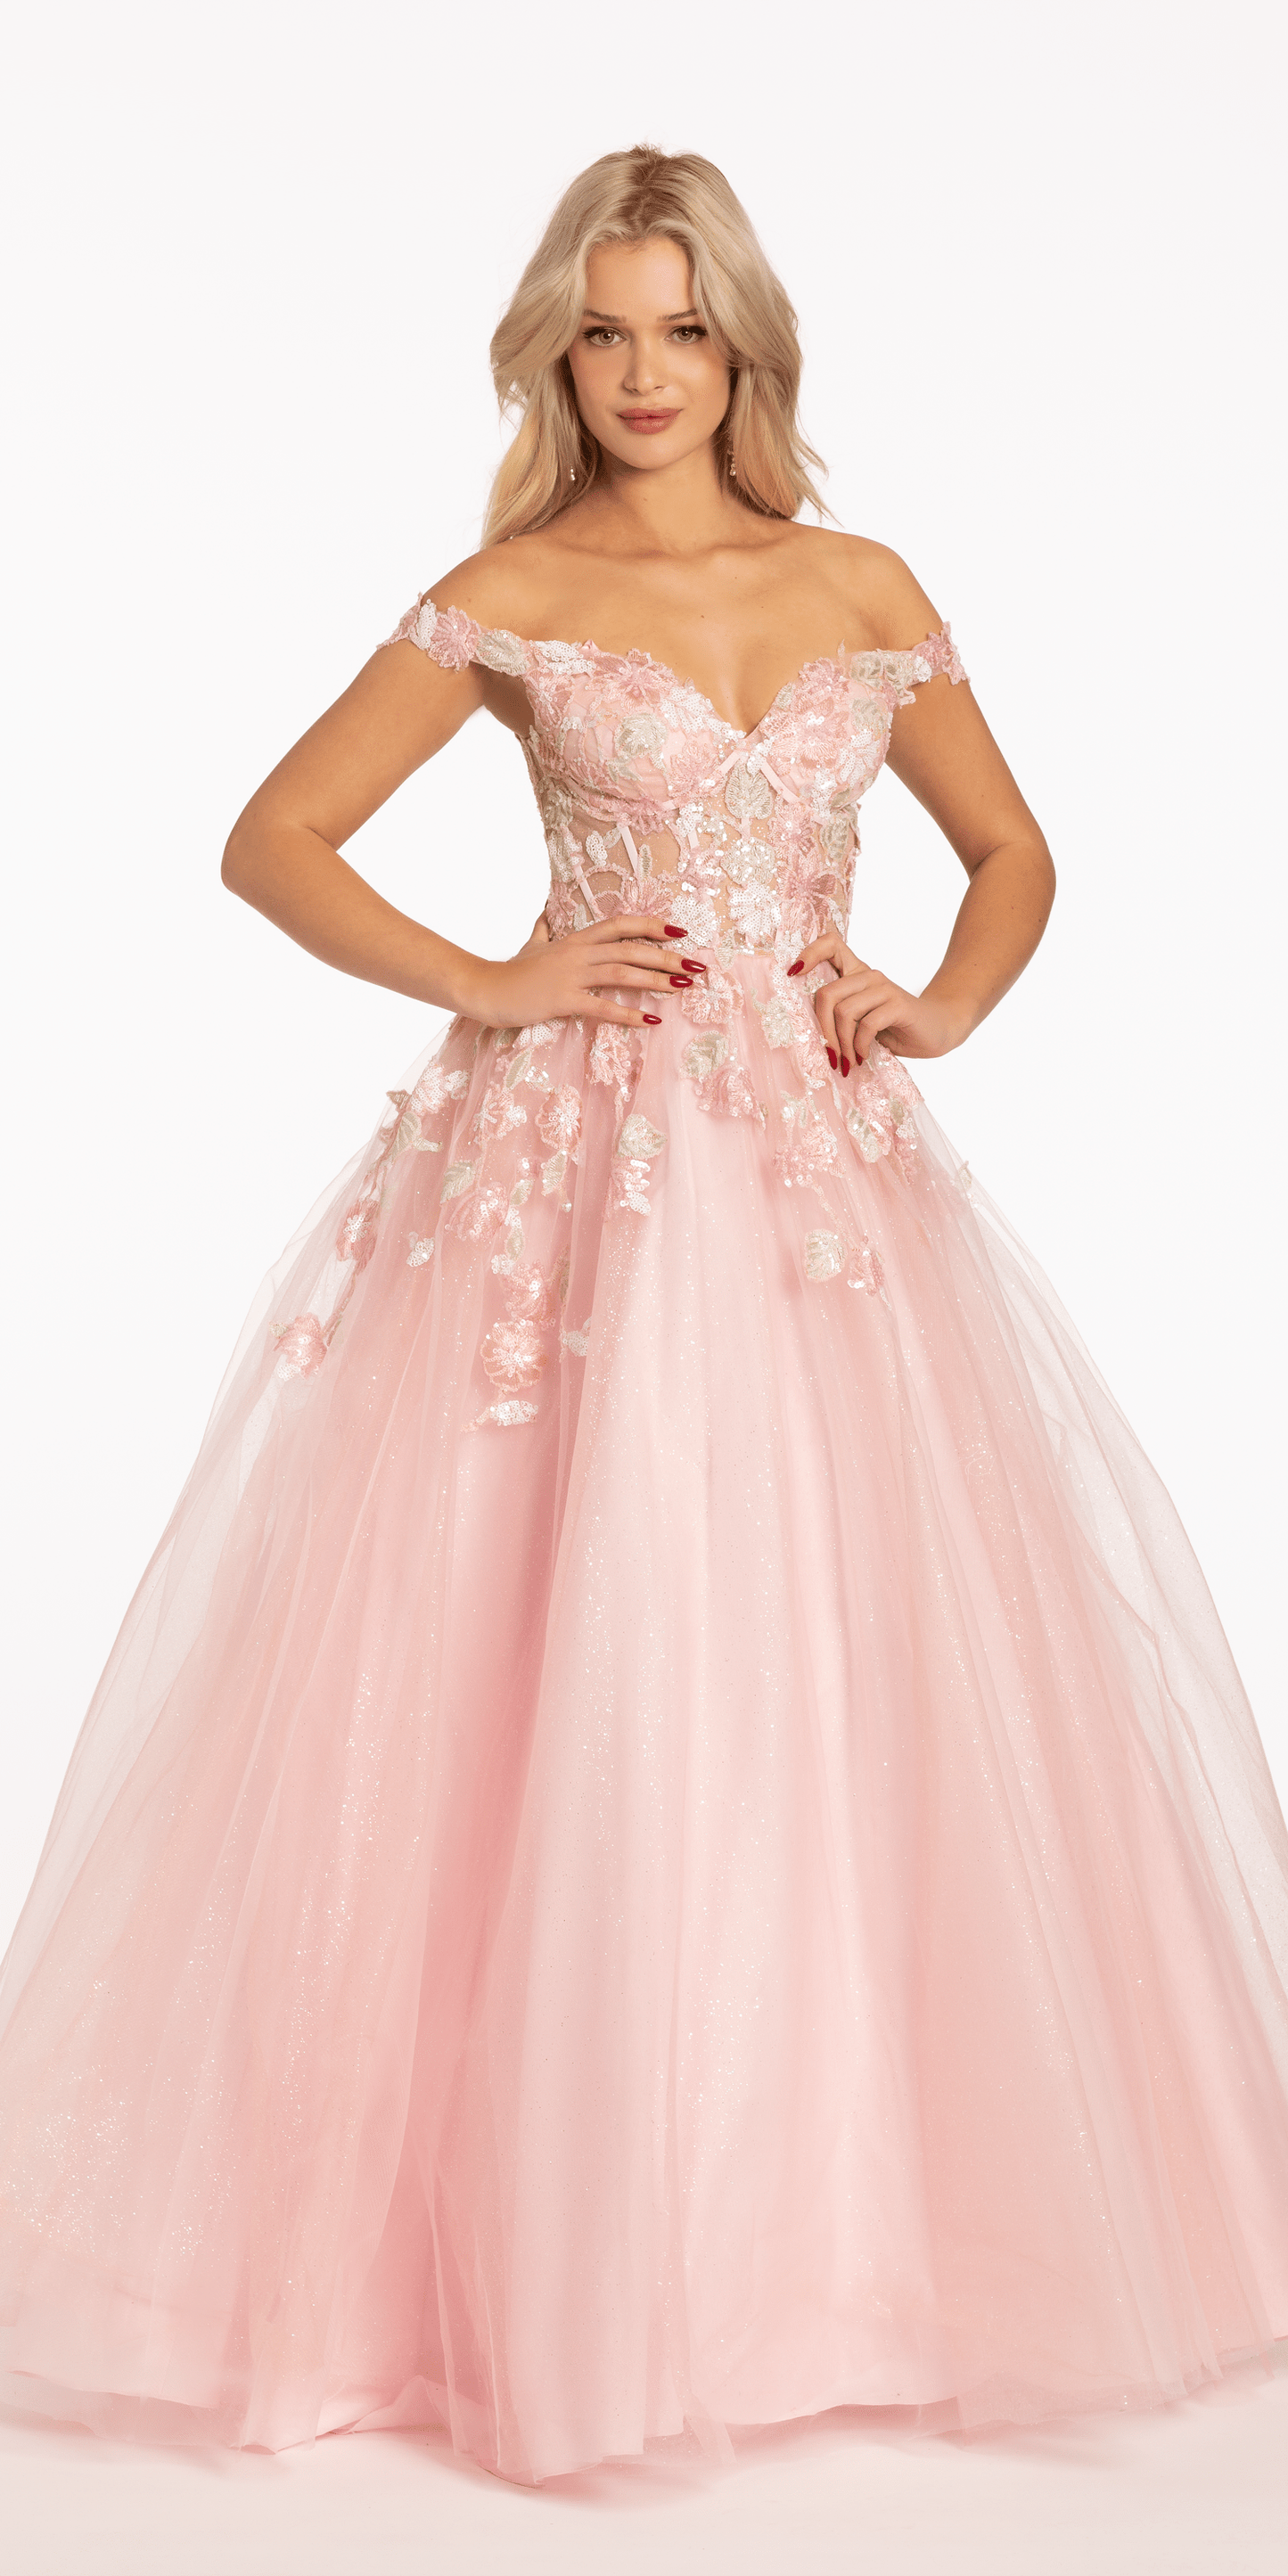 Camille La Vie Off the Shoulder Tulle Ballgown with Sequin Floral Detail missy / 0 / pink-multi